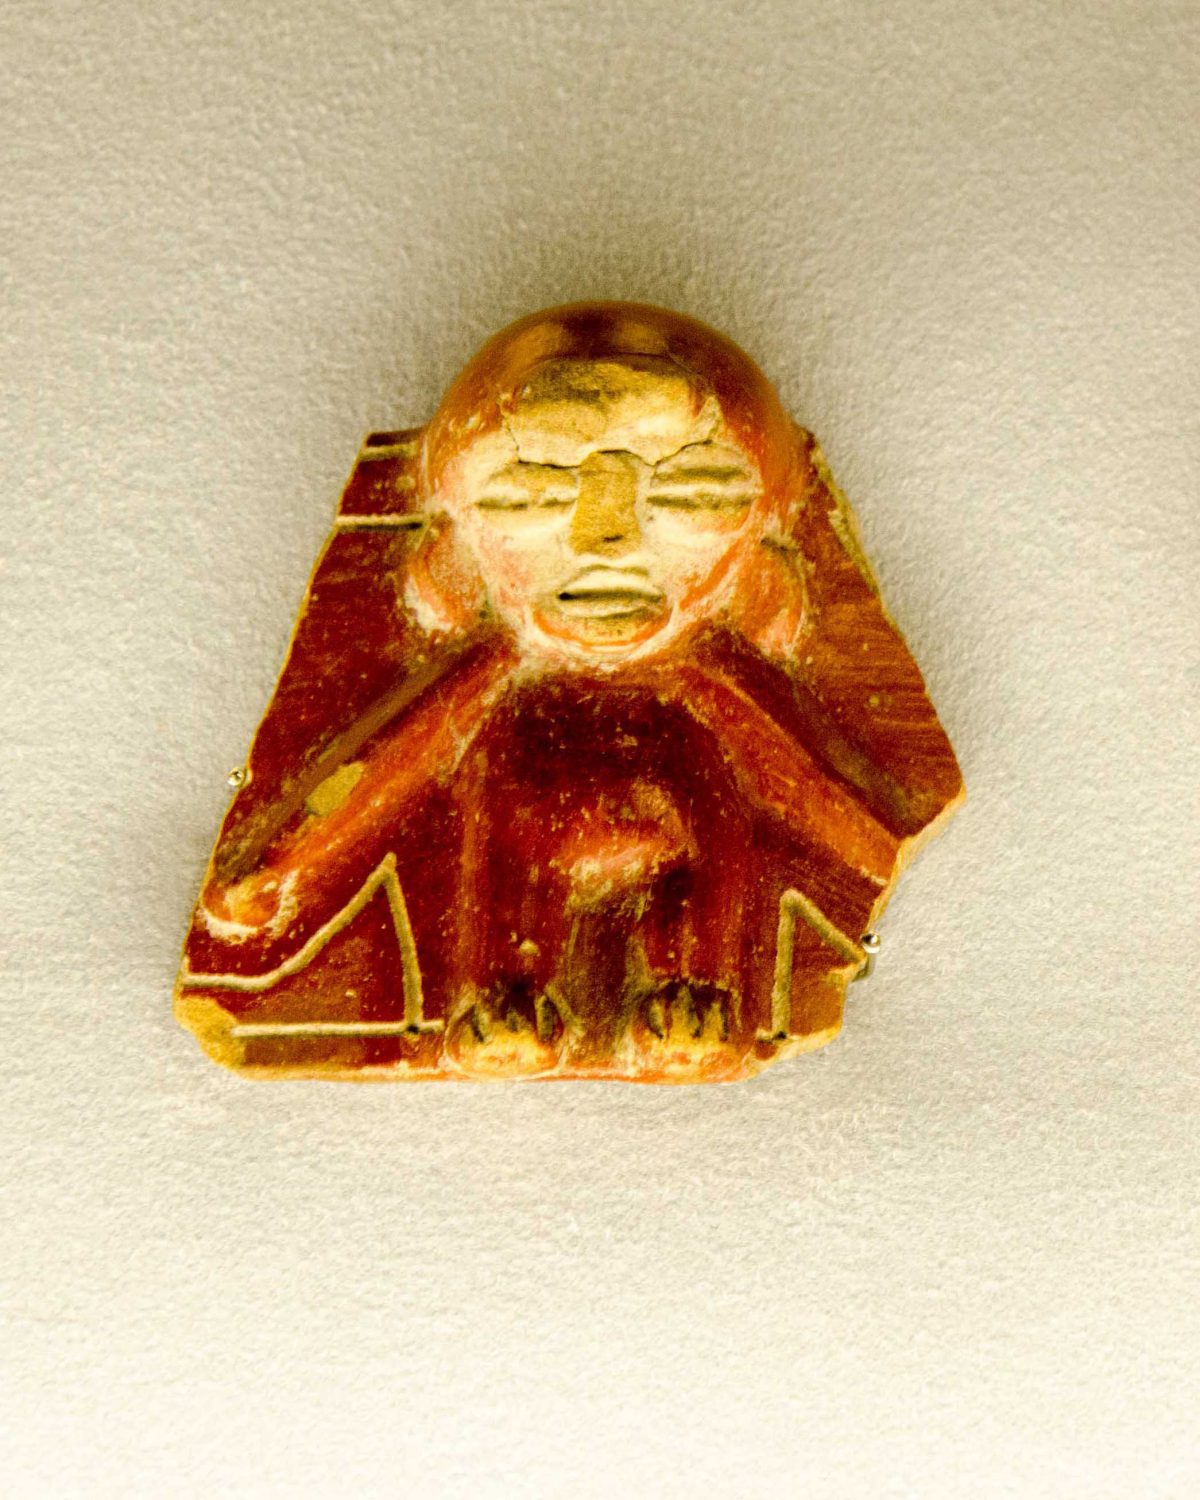 A pottery fragment of displayed at the Weilbauer Museum, La Catolica (PUCE), Quito, Ecuador